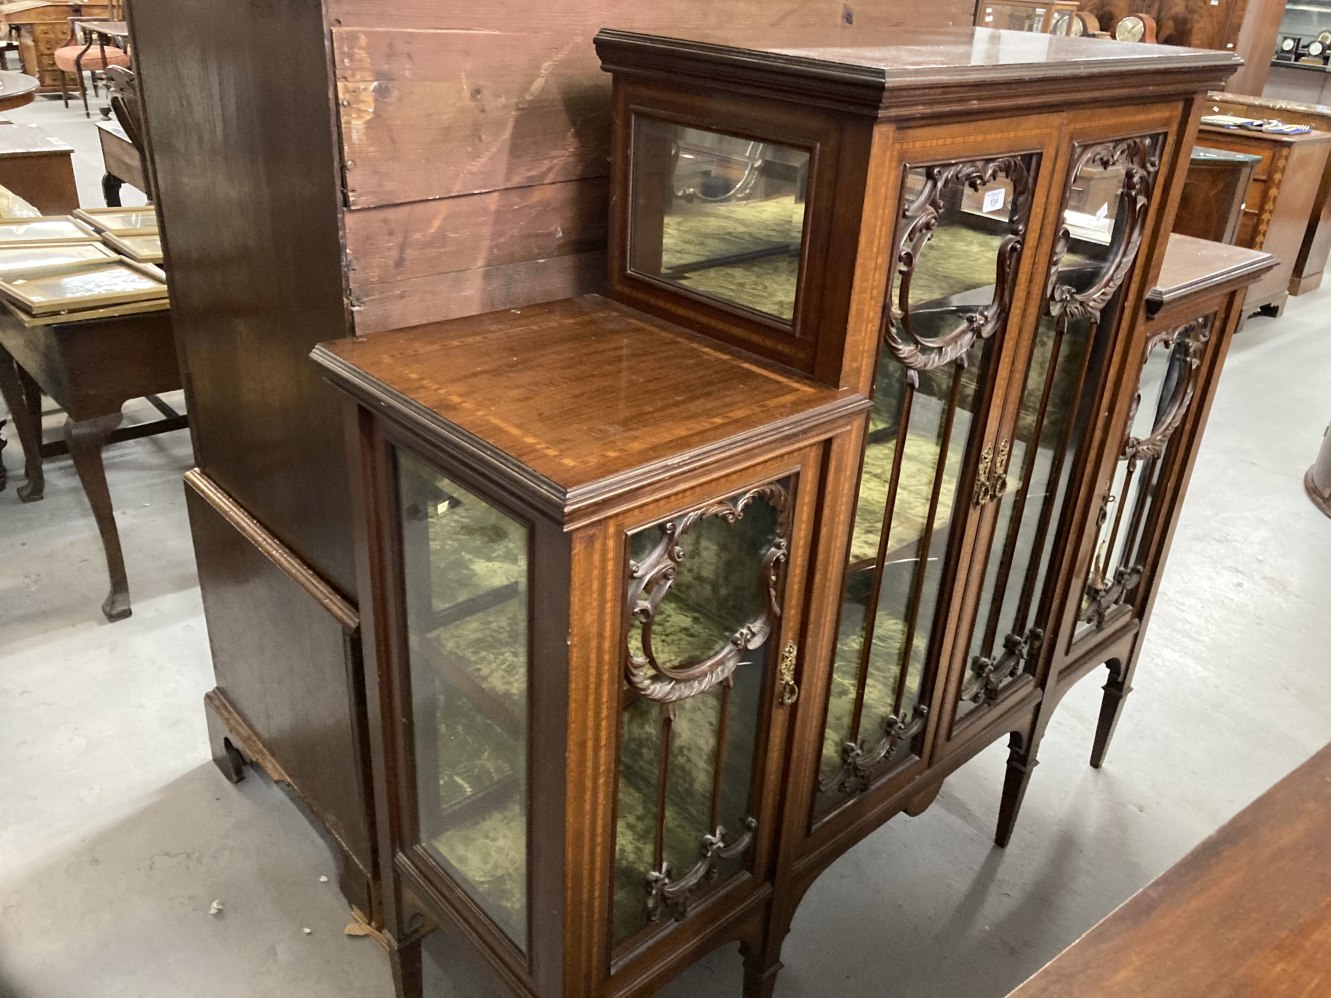 Edwardian inlaid mahogany china display cabinet with three compartments, moulded top and front - Image 4 of 7